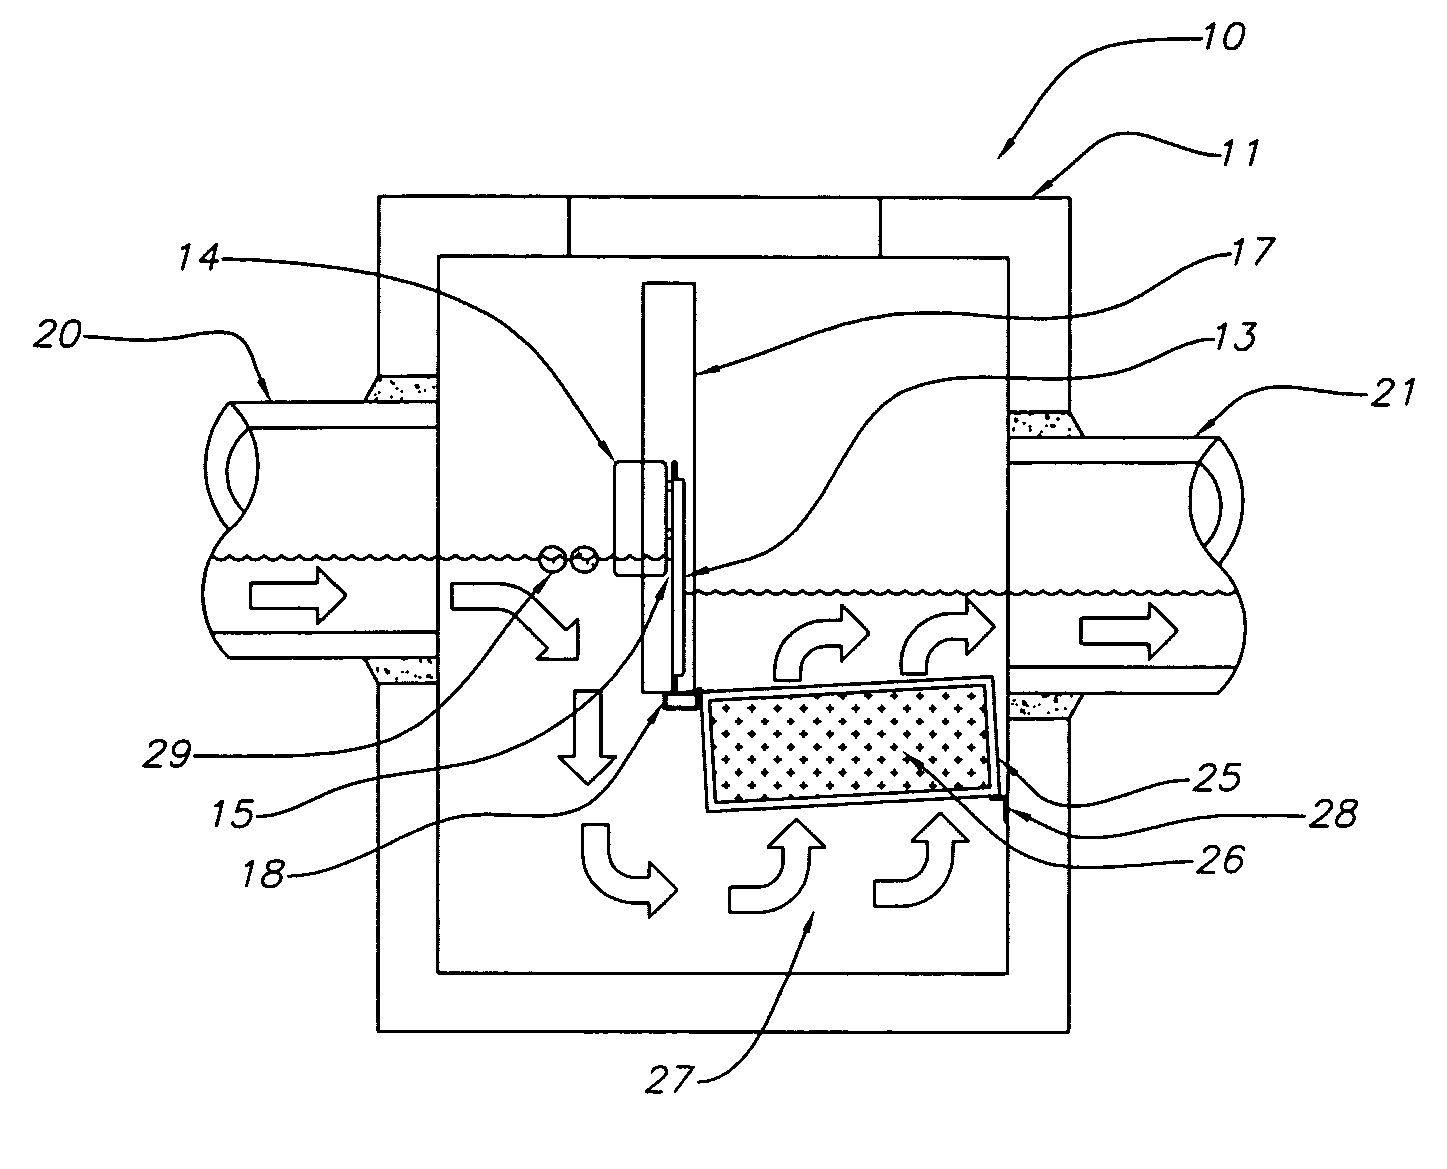 Floating skimmer apparatus with up-flow filter